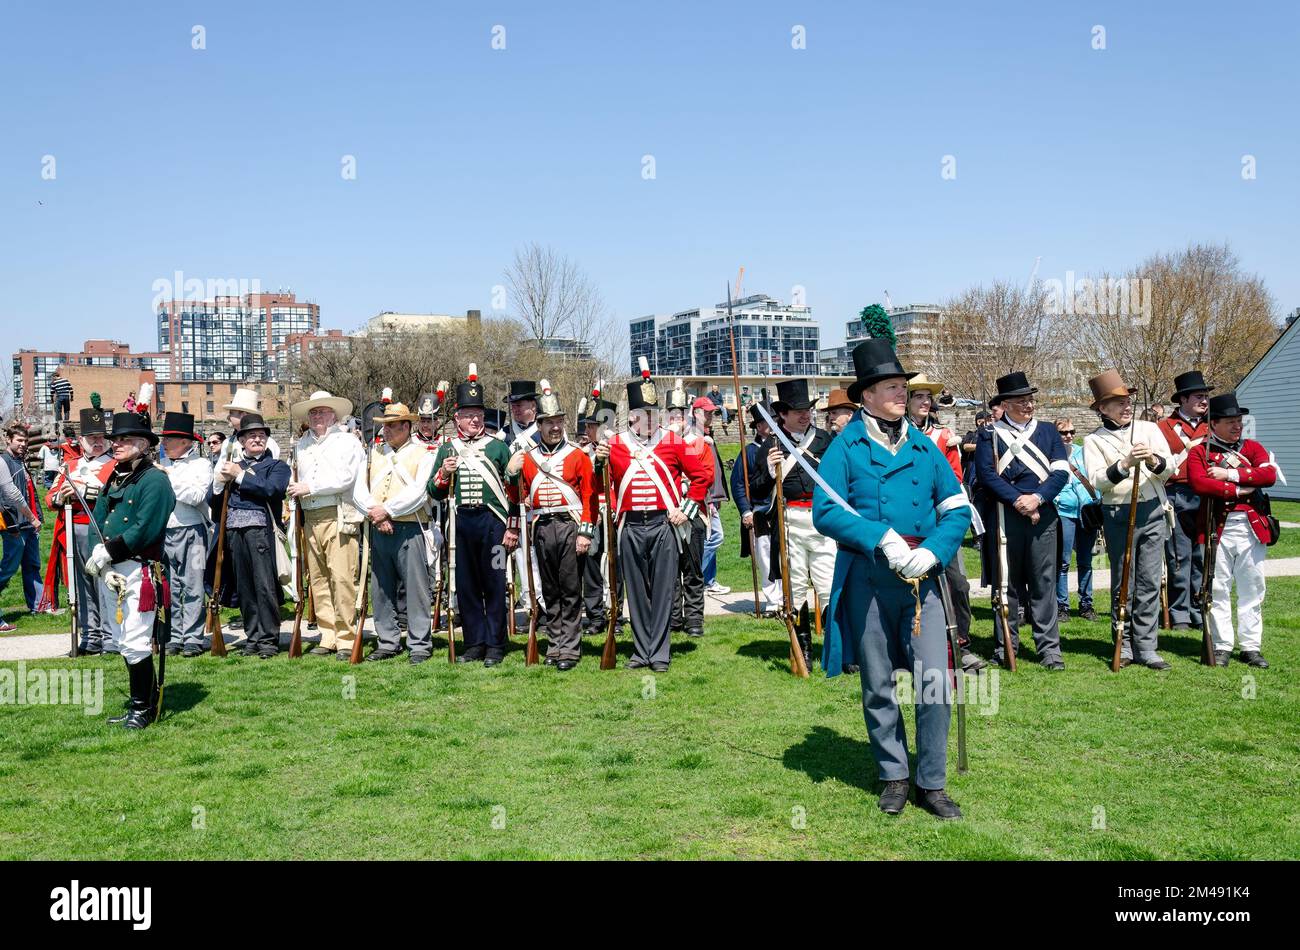 The image was taken during the celebrations for the 200th anniversary of the Battle of York in Toronto, Canada, in 2013 Stock Photo